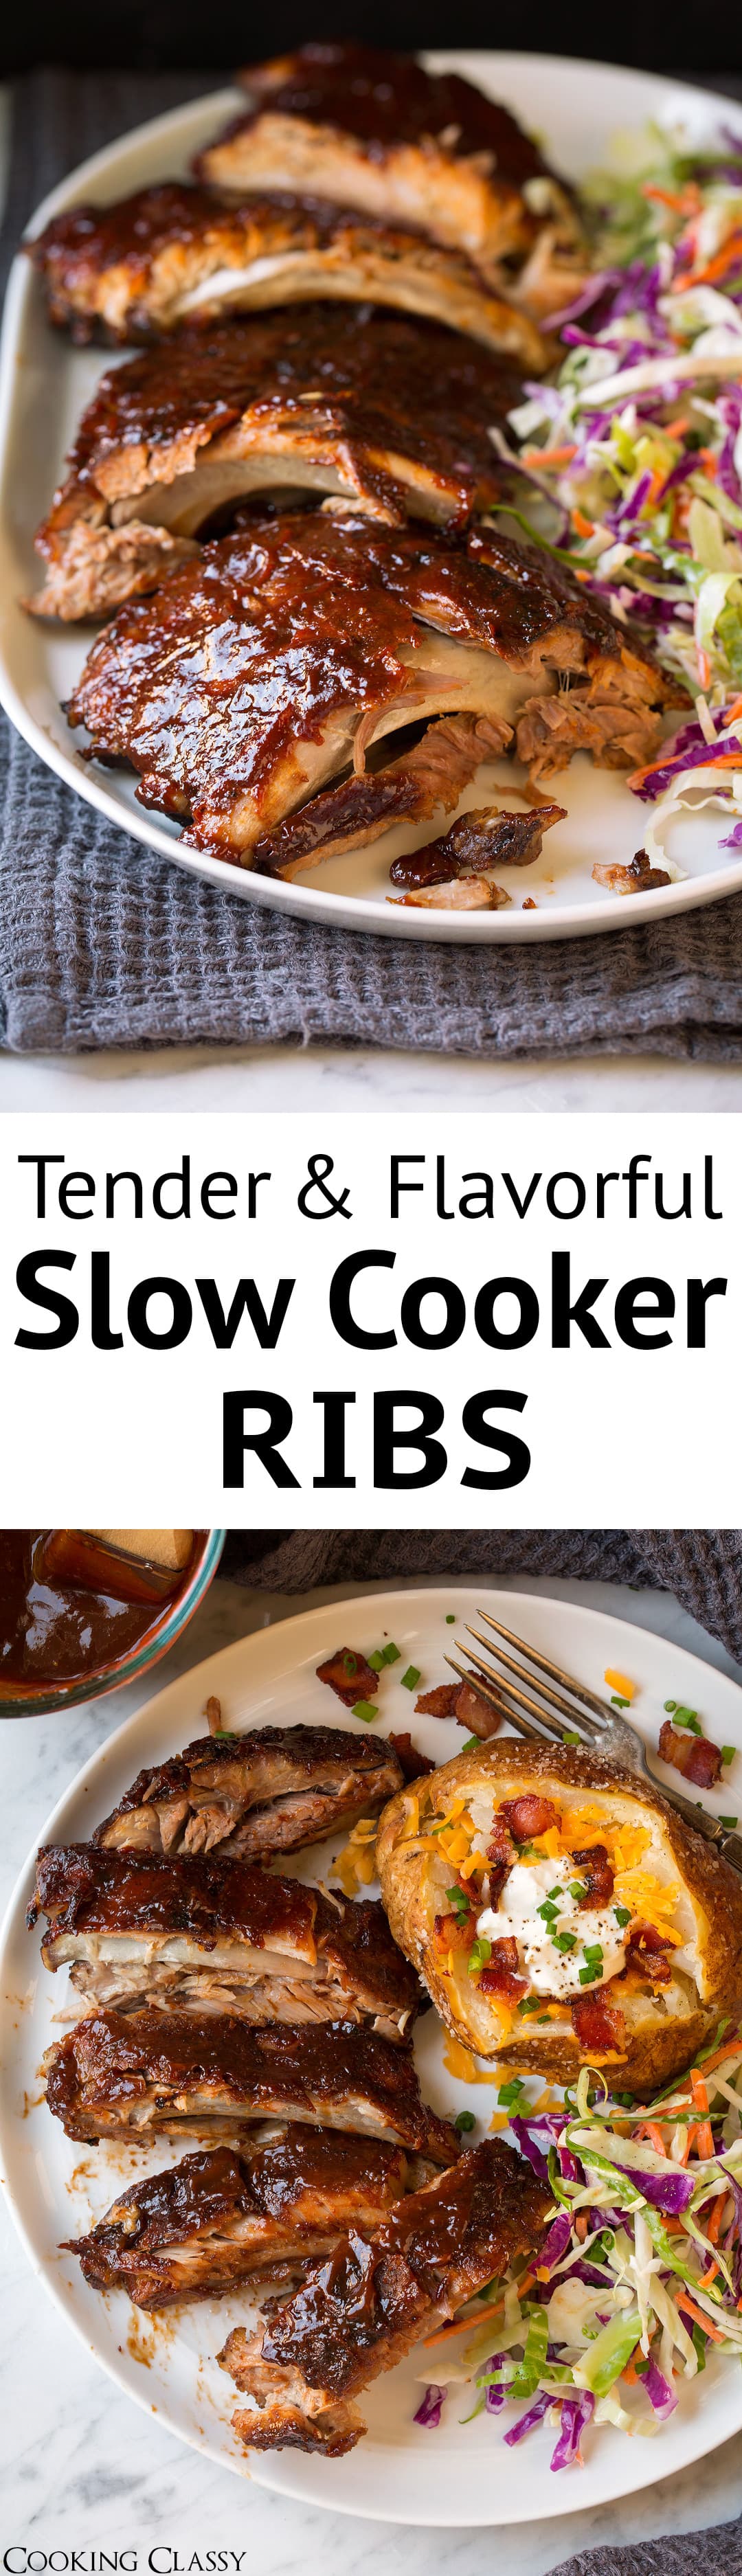 Tender Slow Cooker Ribs (with Homemade BBQ Sauce!) - Cooking Classy